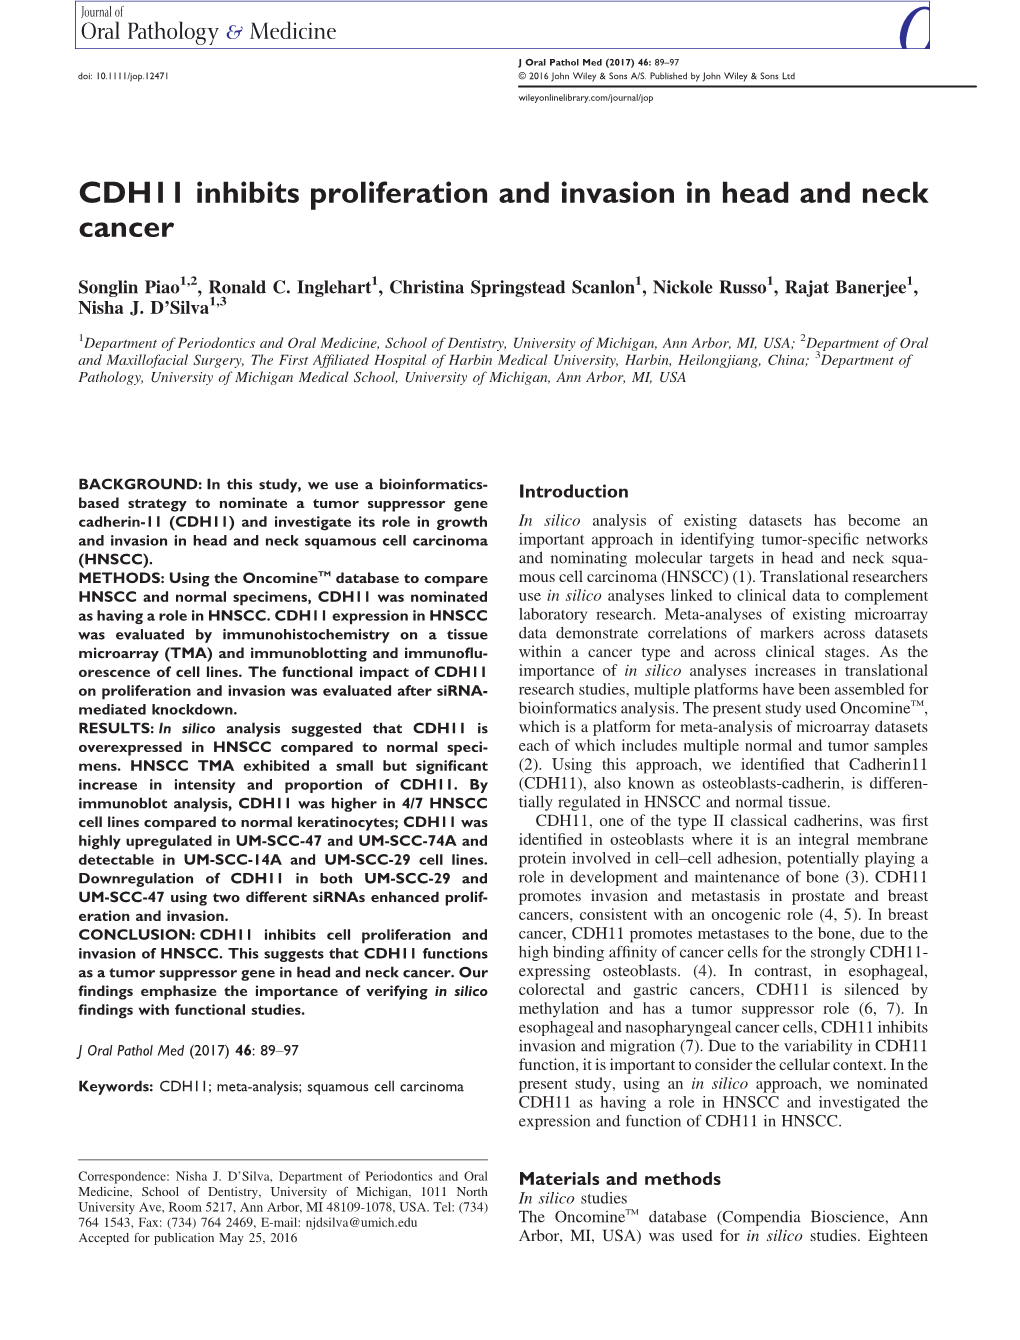 CDH11 Inhibits Proliferation and Invasion in Head and Neck Cancer